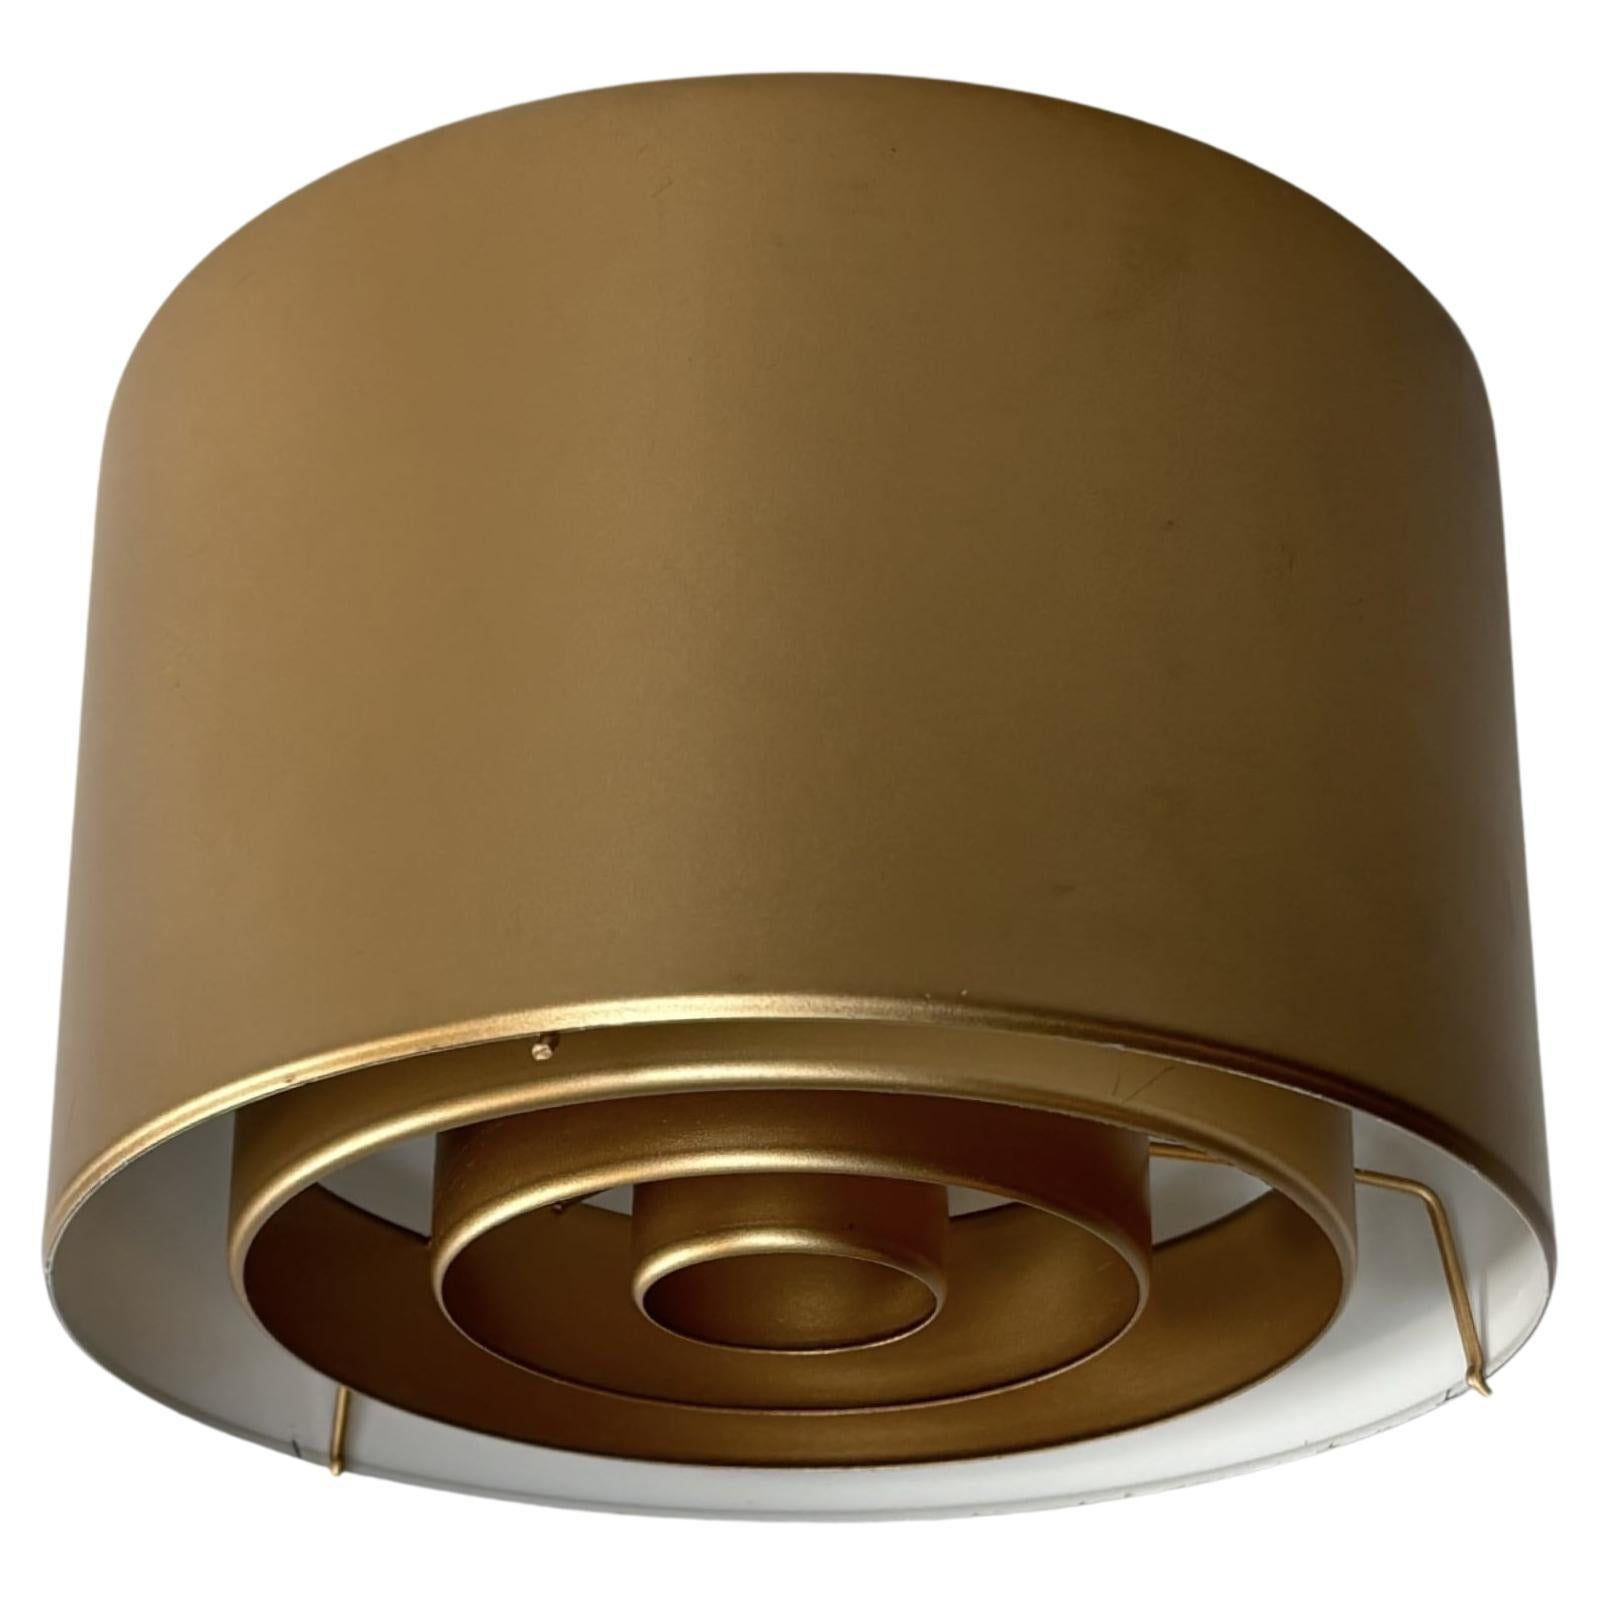 Ceiling lamp model 971-135/20 by Yki Nummi for Orno, Finland, 1970s